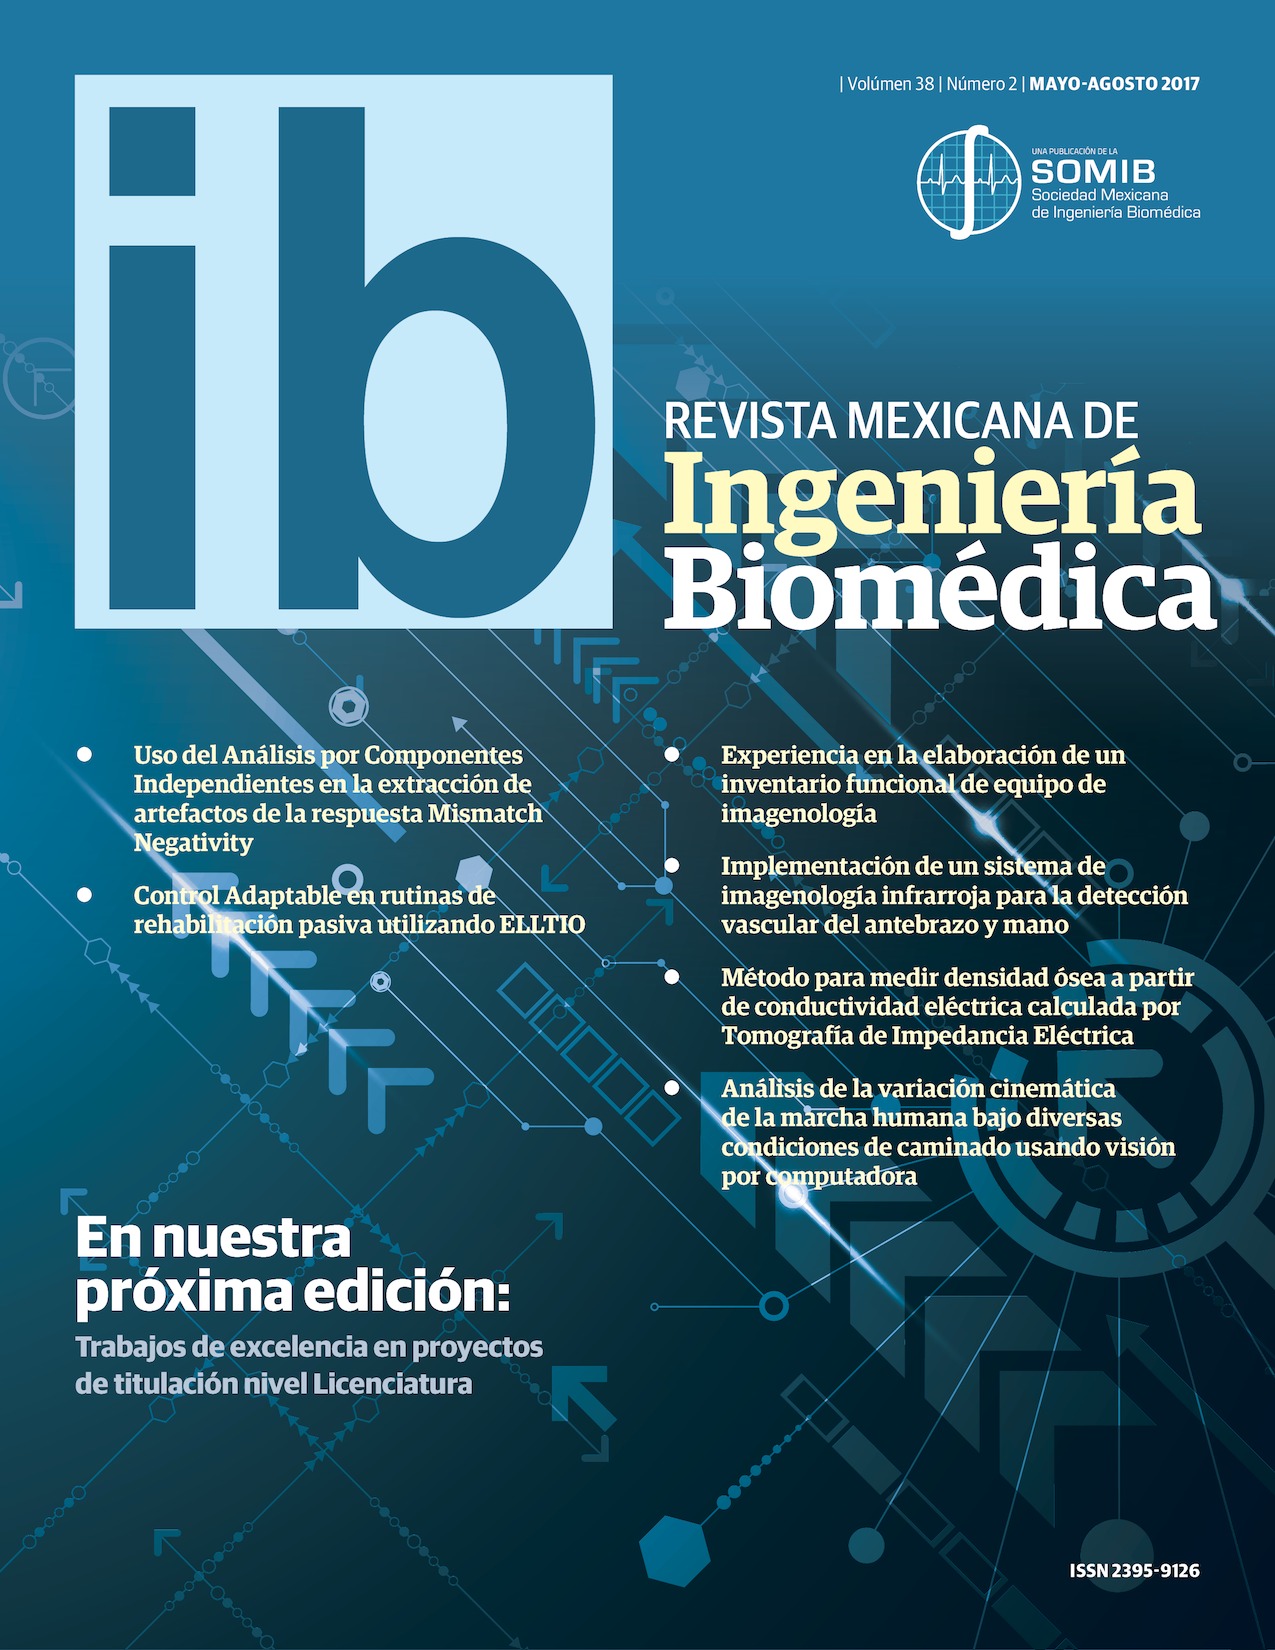 VIII Latin American Conference on Biomedical Engineering and XLII National  Conference on Biomedical Engineering